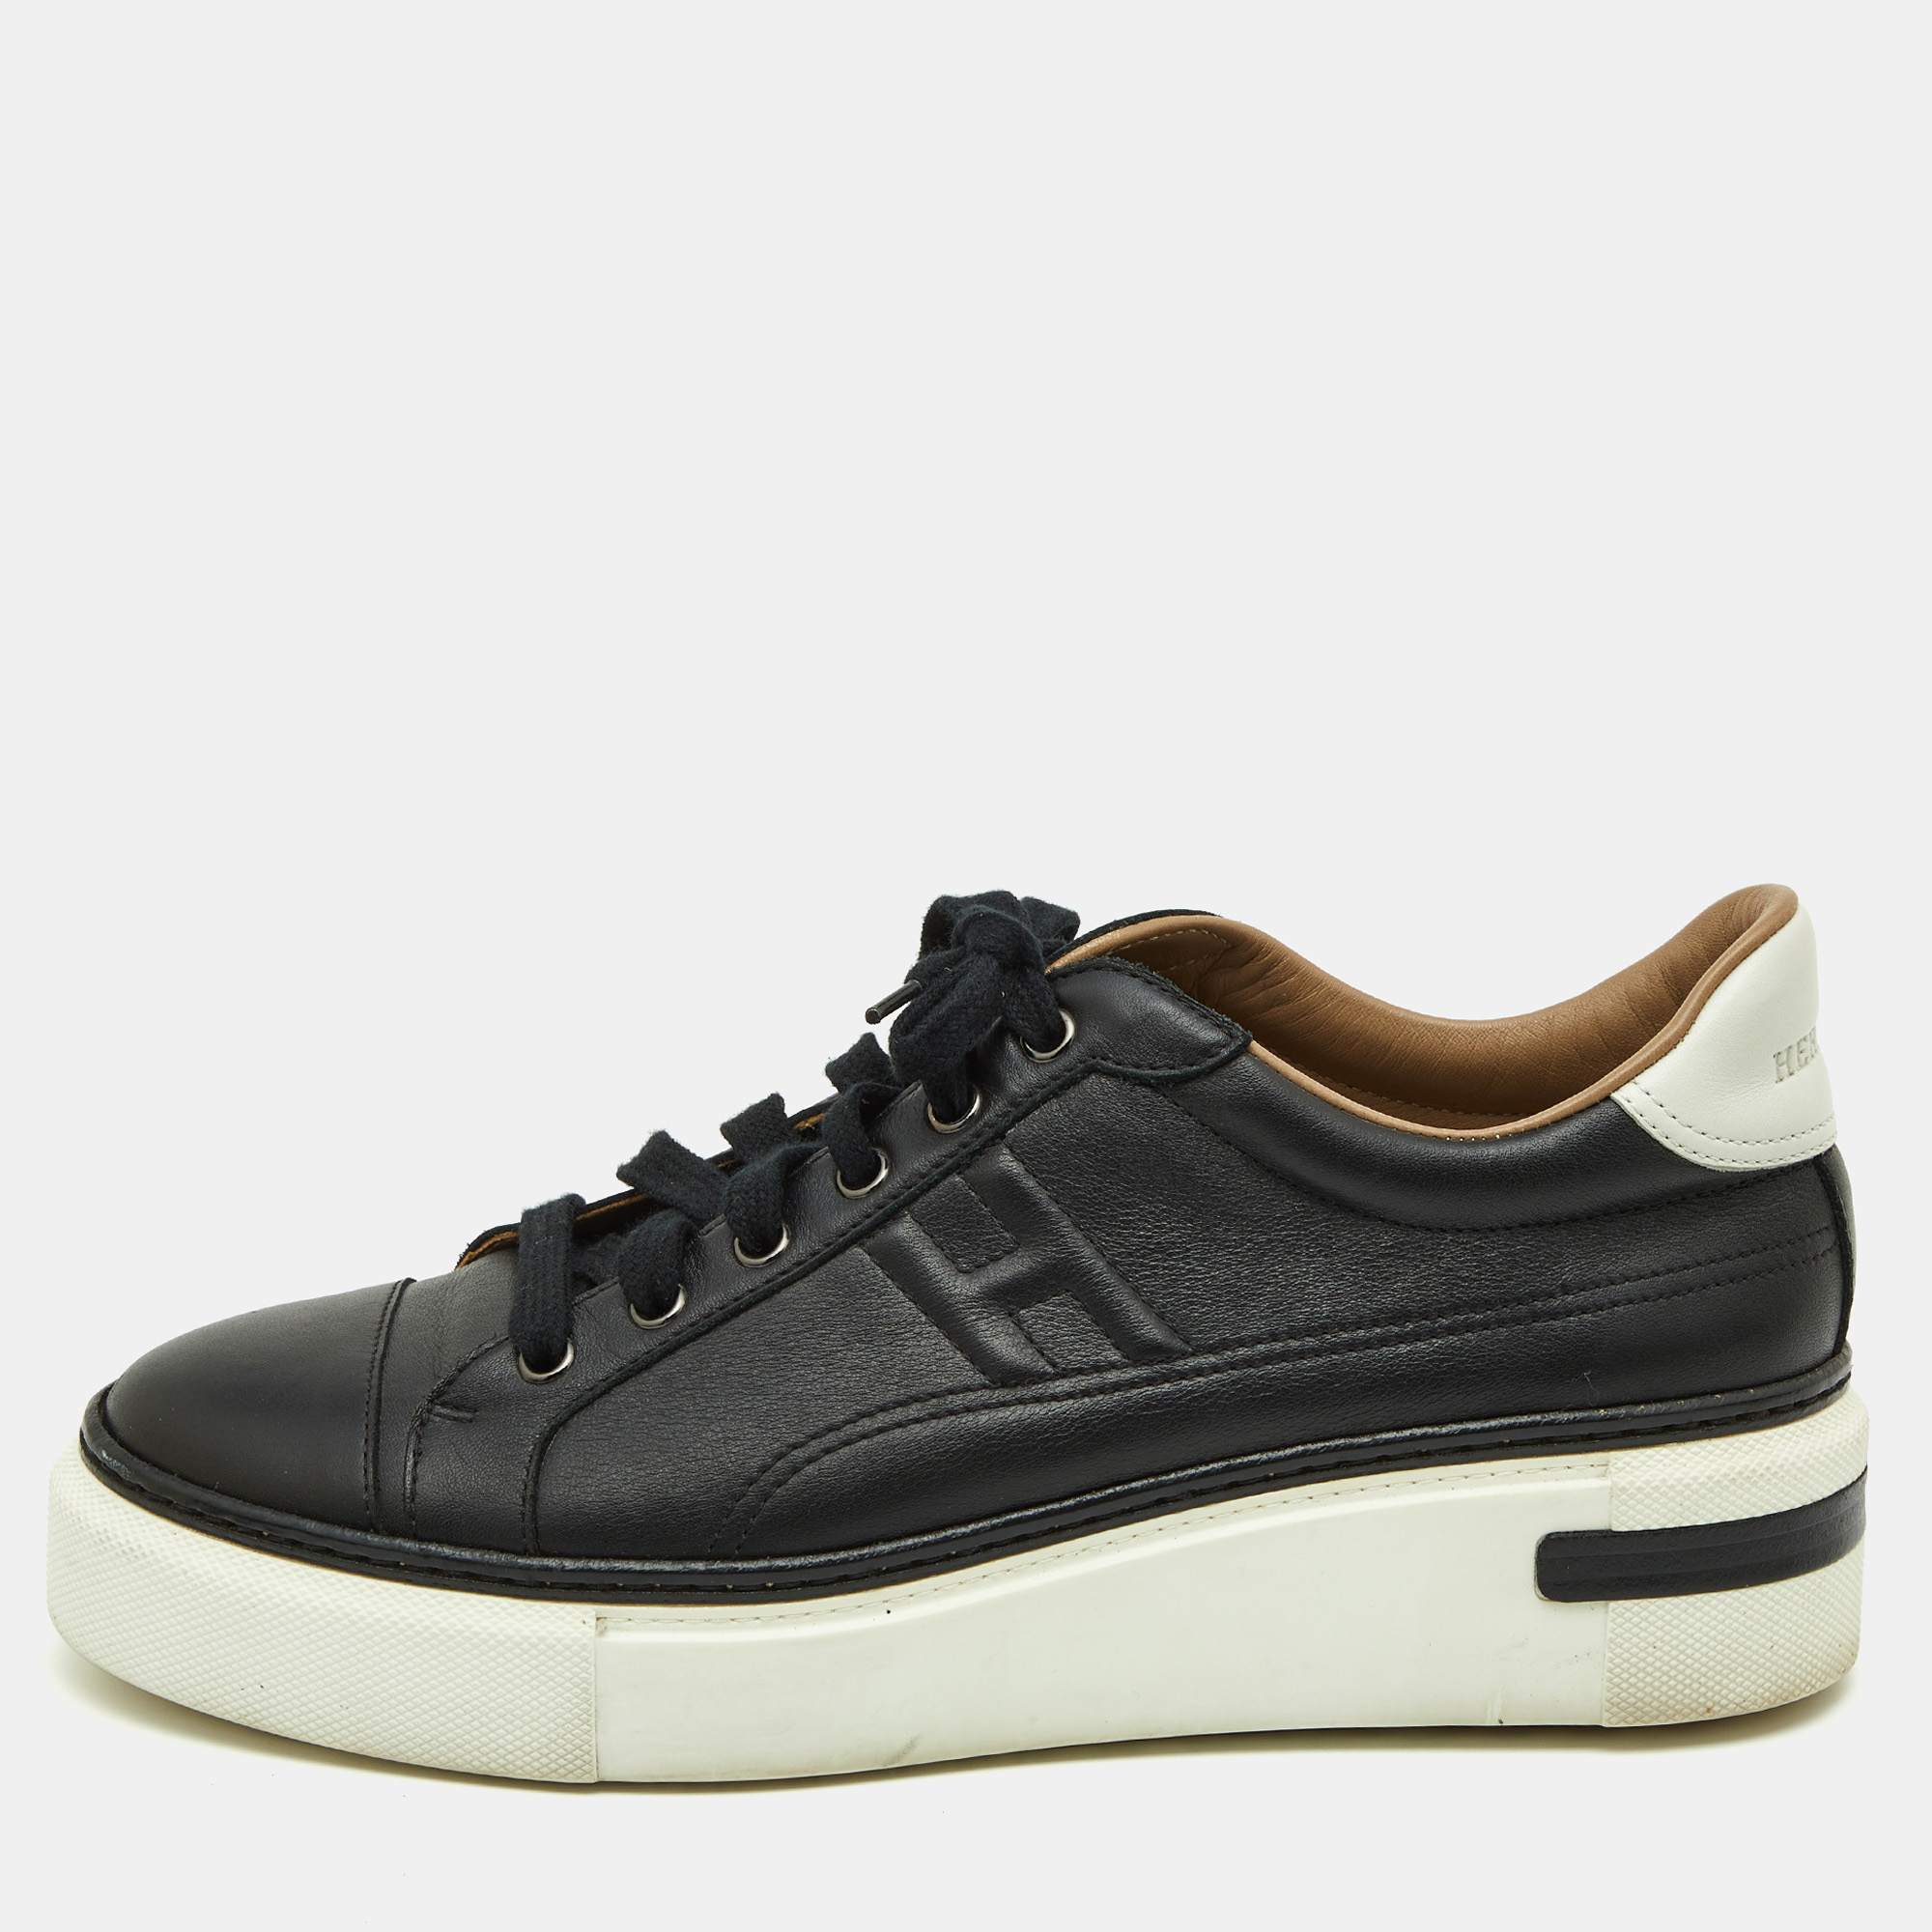 Hermes Black Leather Quicker Sneakers Size 41